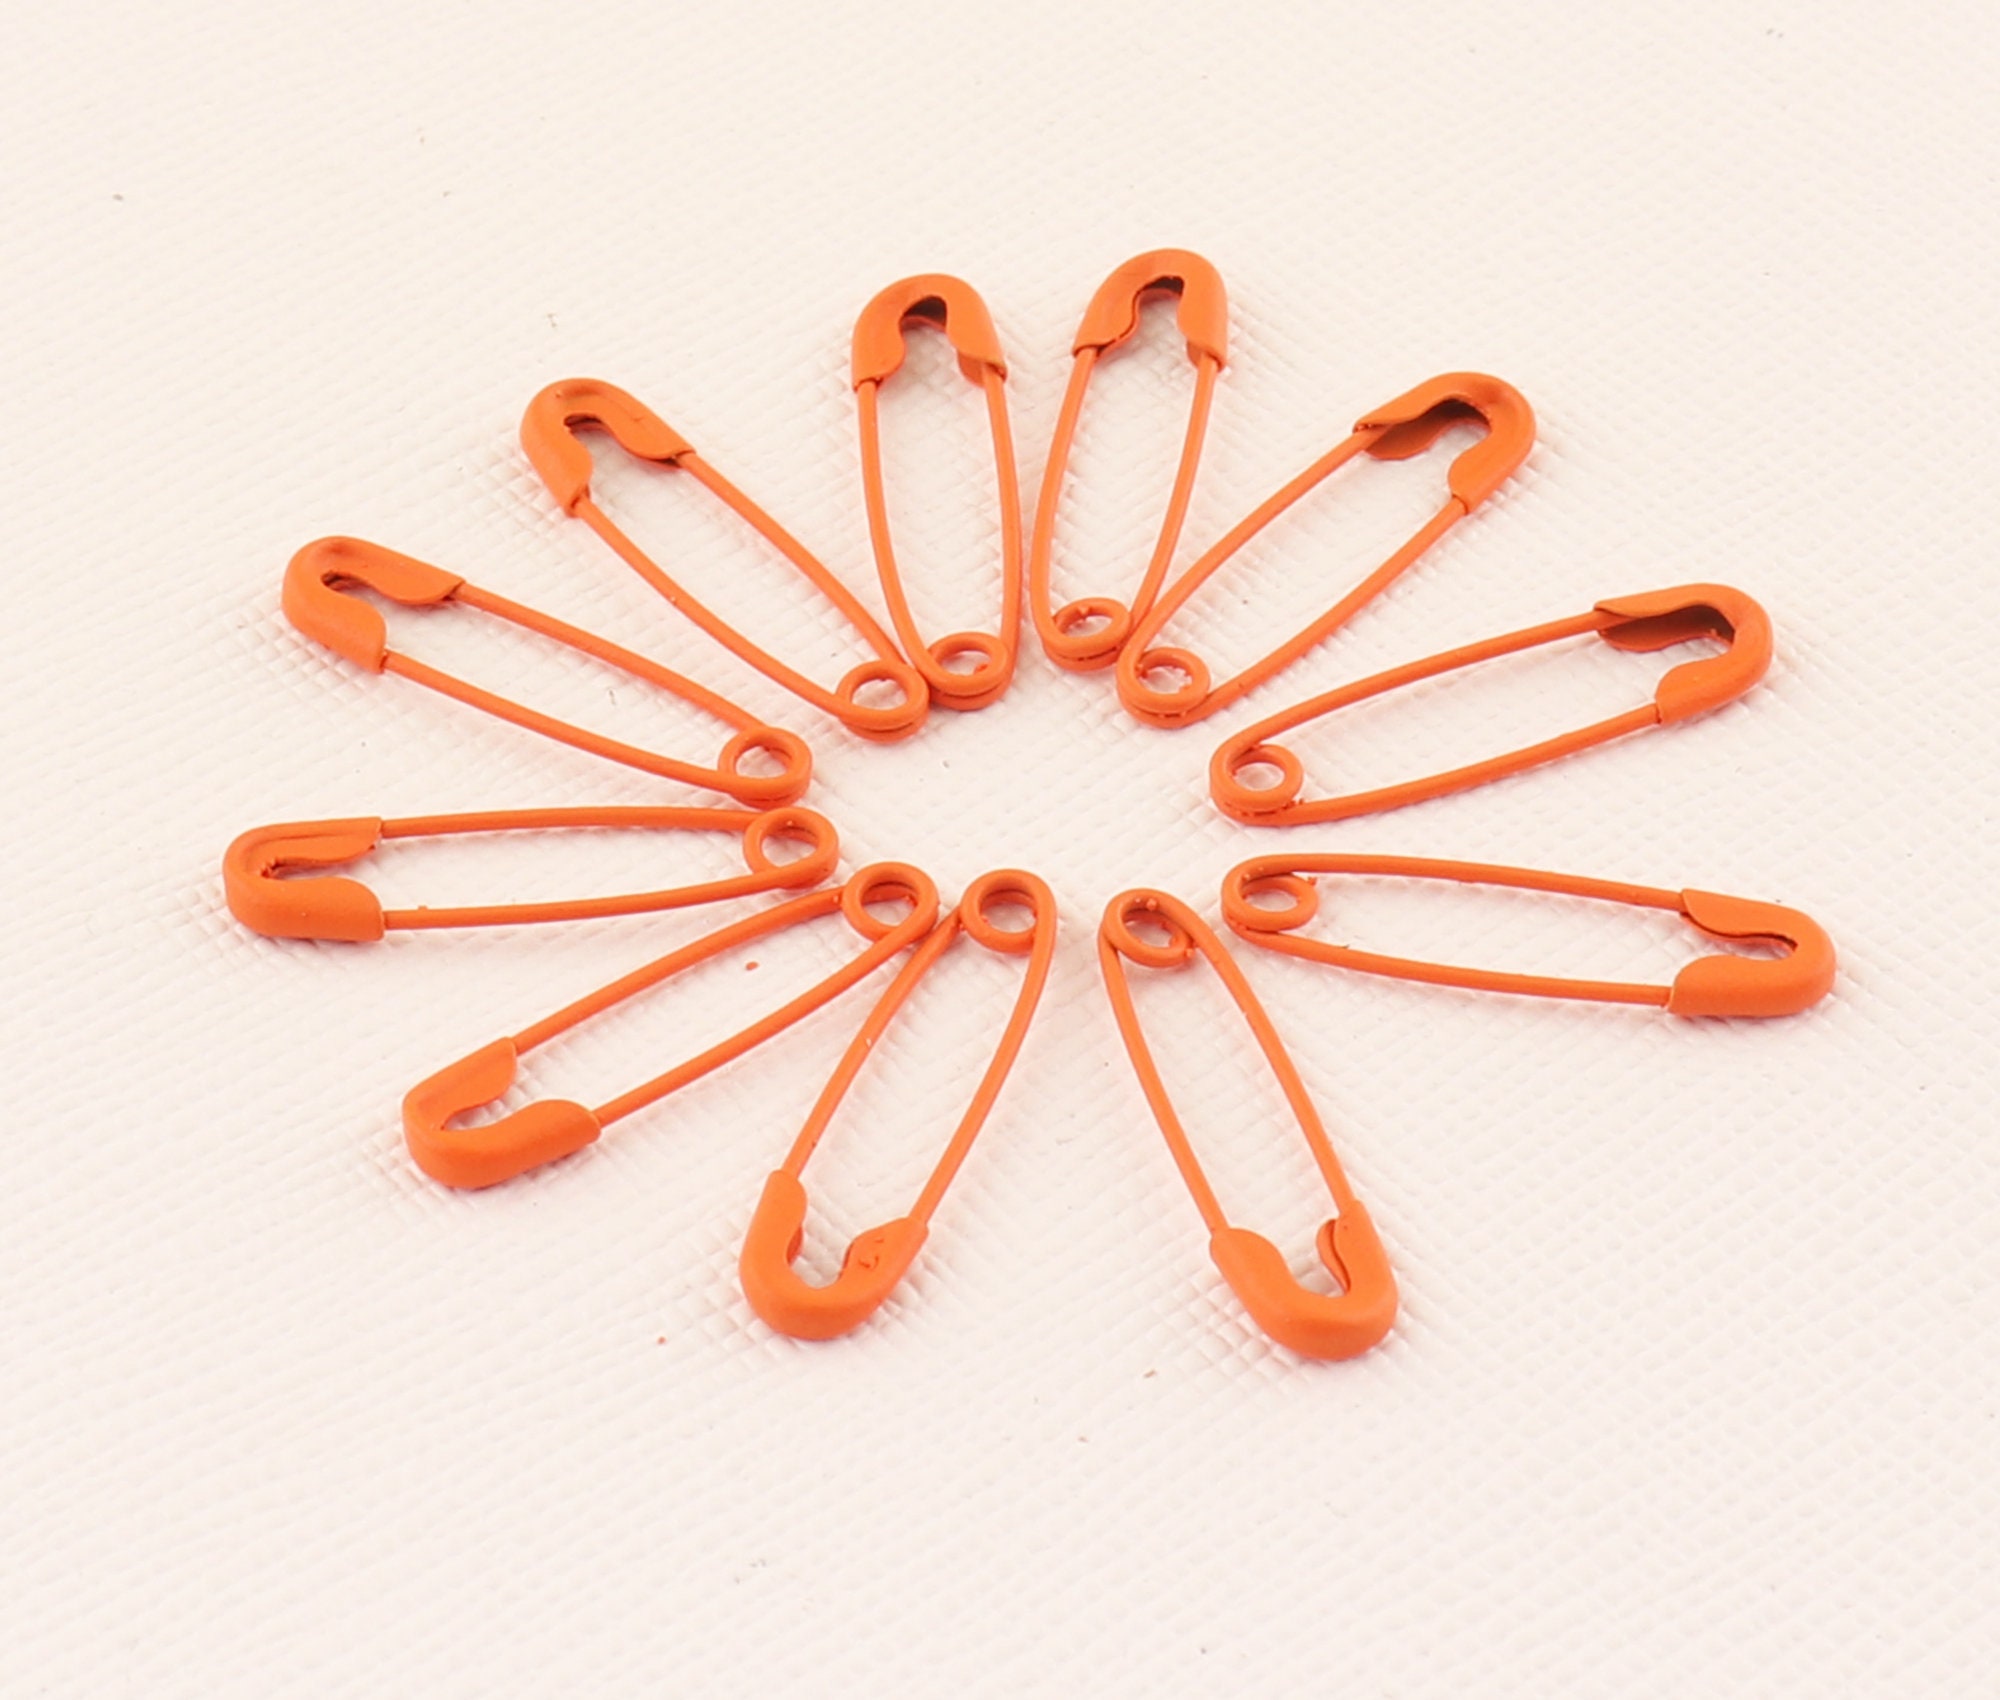 Orange Safety Pins 100-300pcs 184mm Mini Brooch Safety Pins Safety Pins  Garment Pins Hang Tags Safety Pins Sewing Safety Pins Supply 